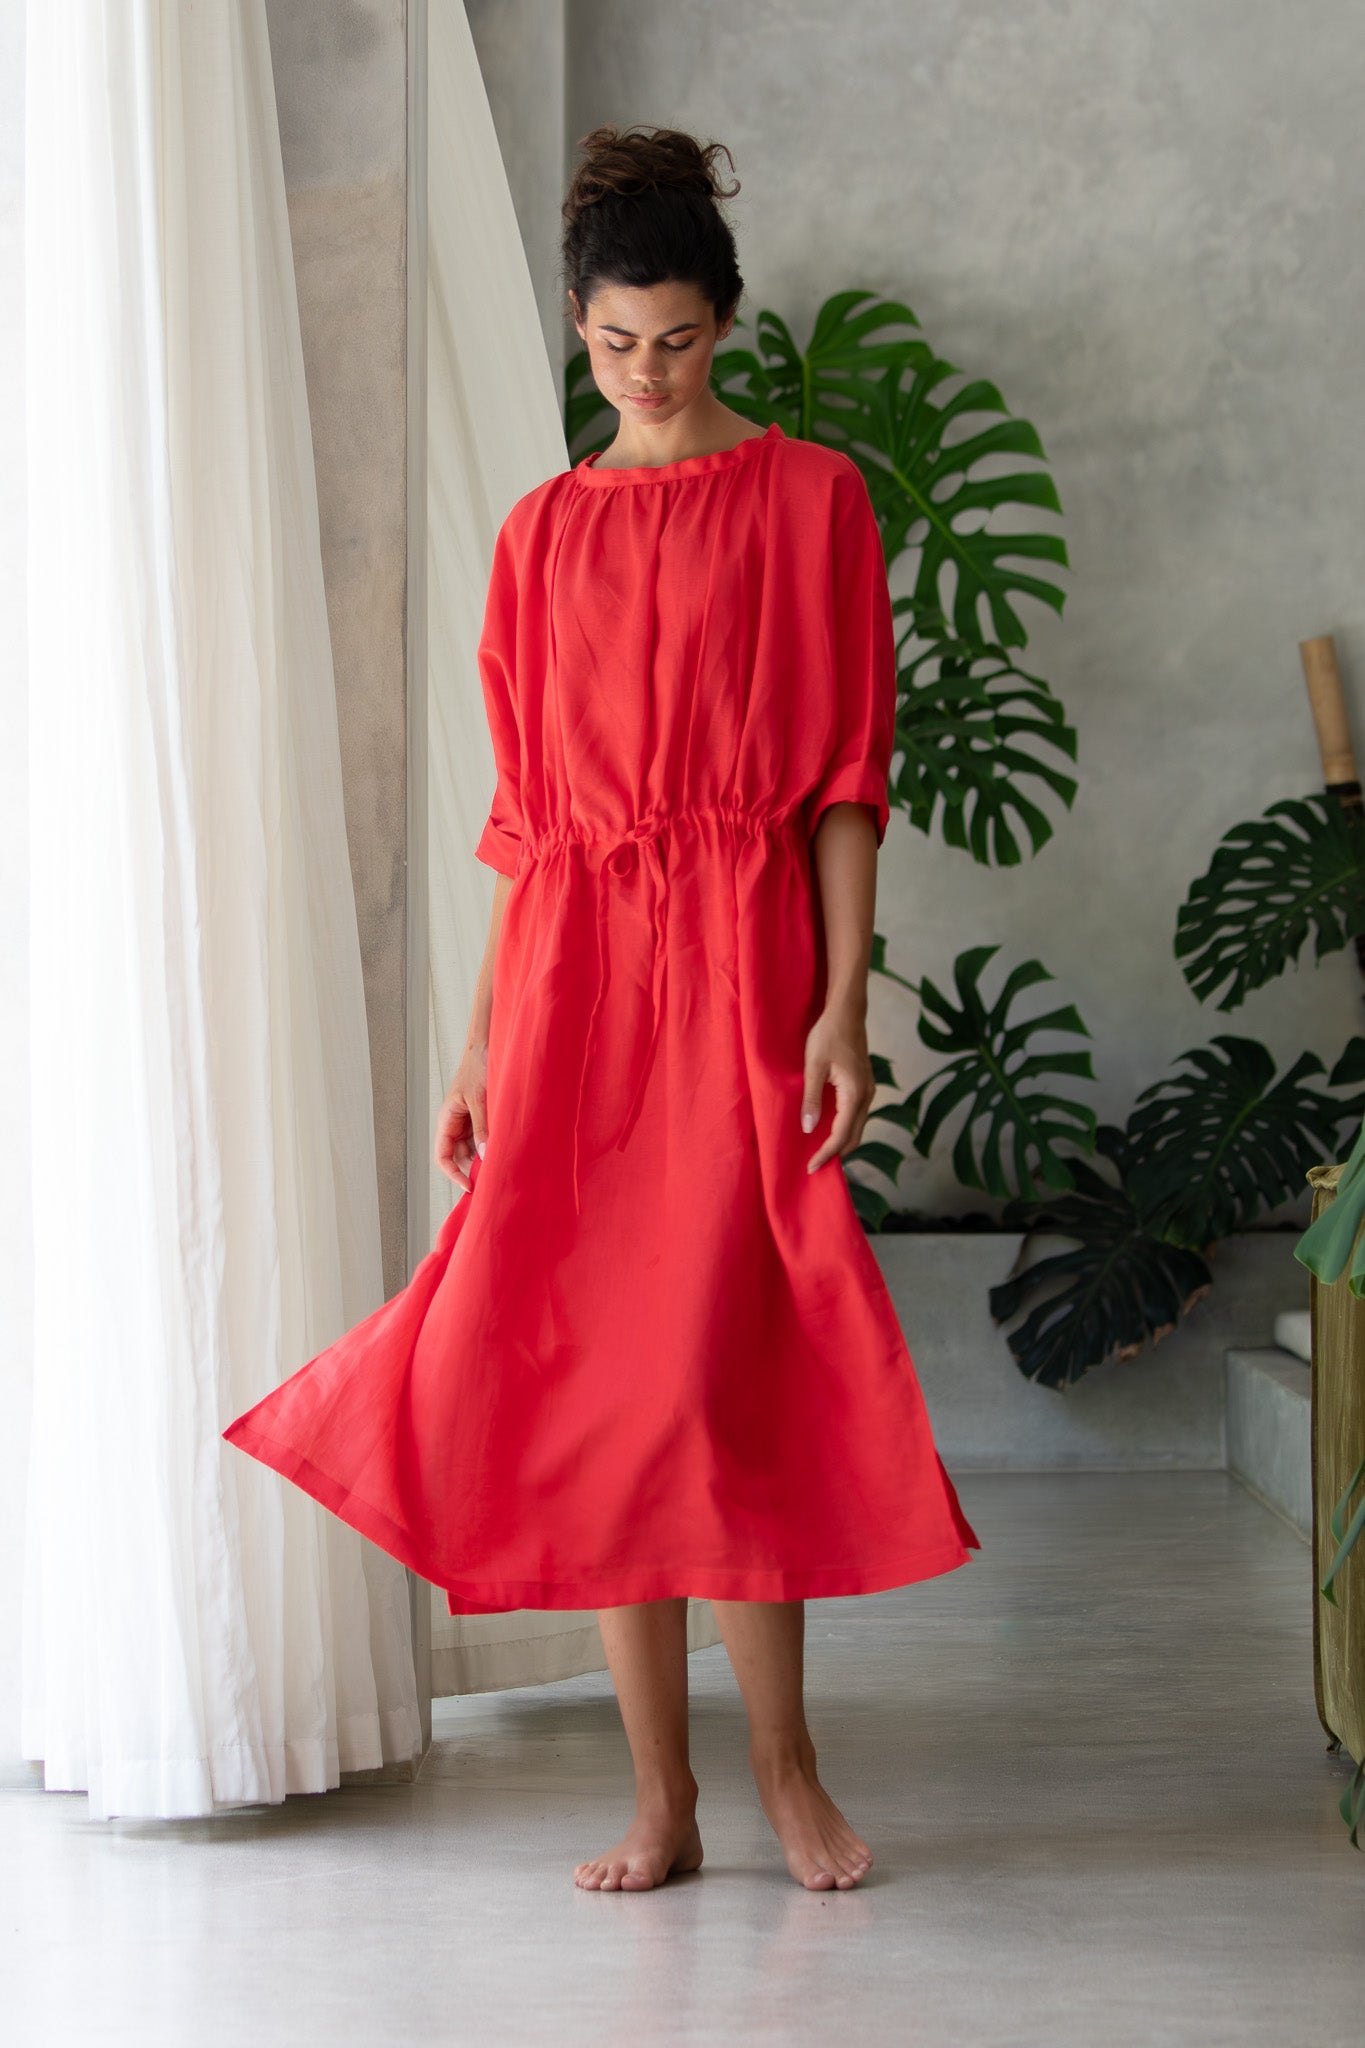 flowing red linen dress with the beautiful model looking down at the ground  